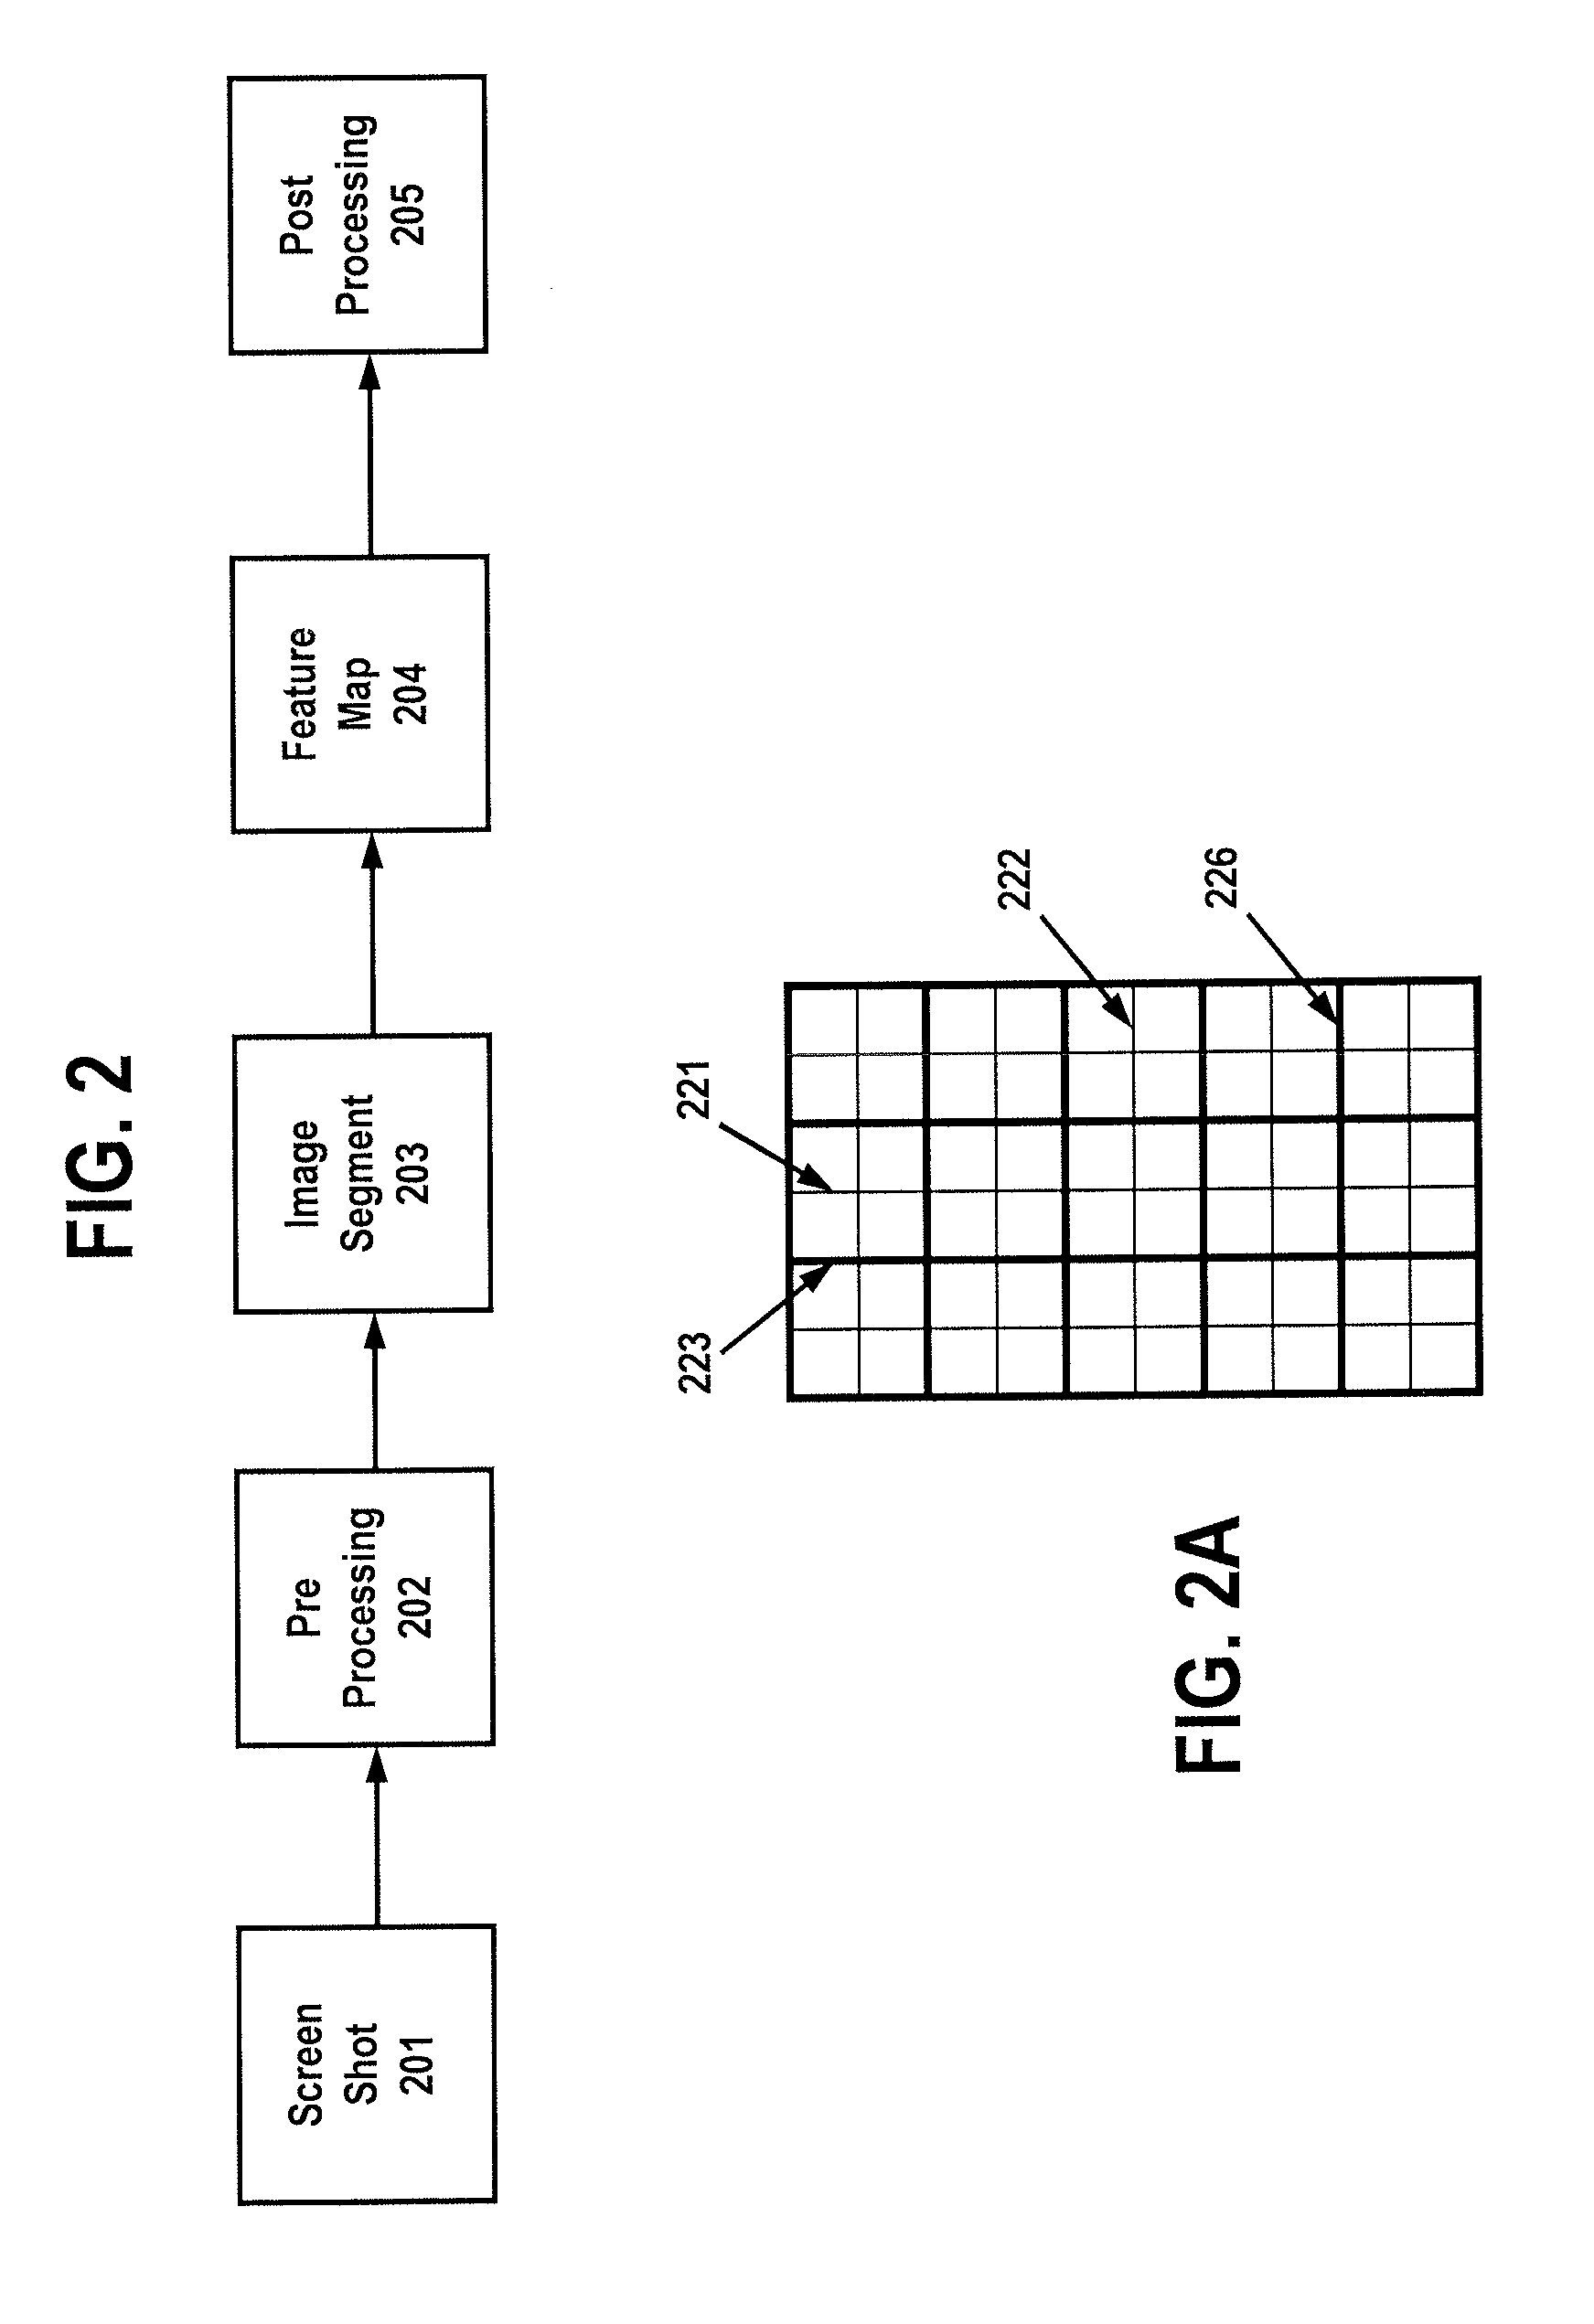 Systems Apparatus and Methods for Determining Computer Apparatus Usage Via Processed Visual Indicia